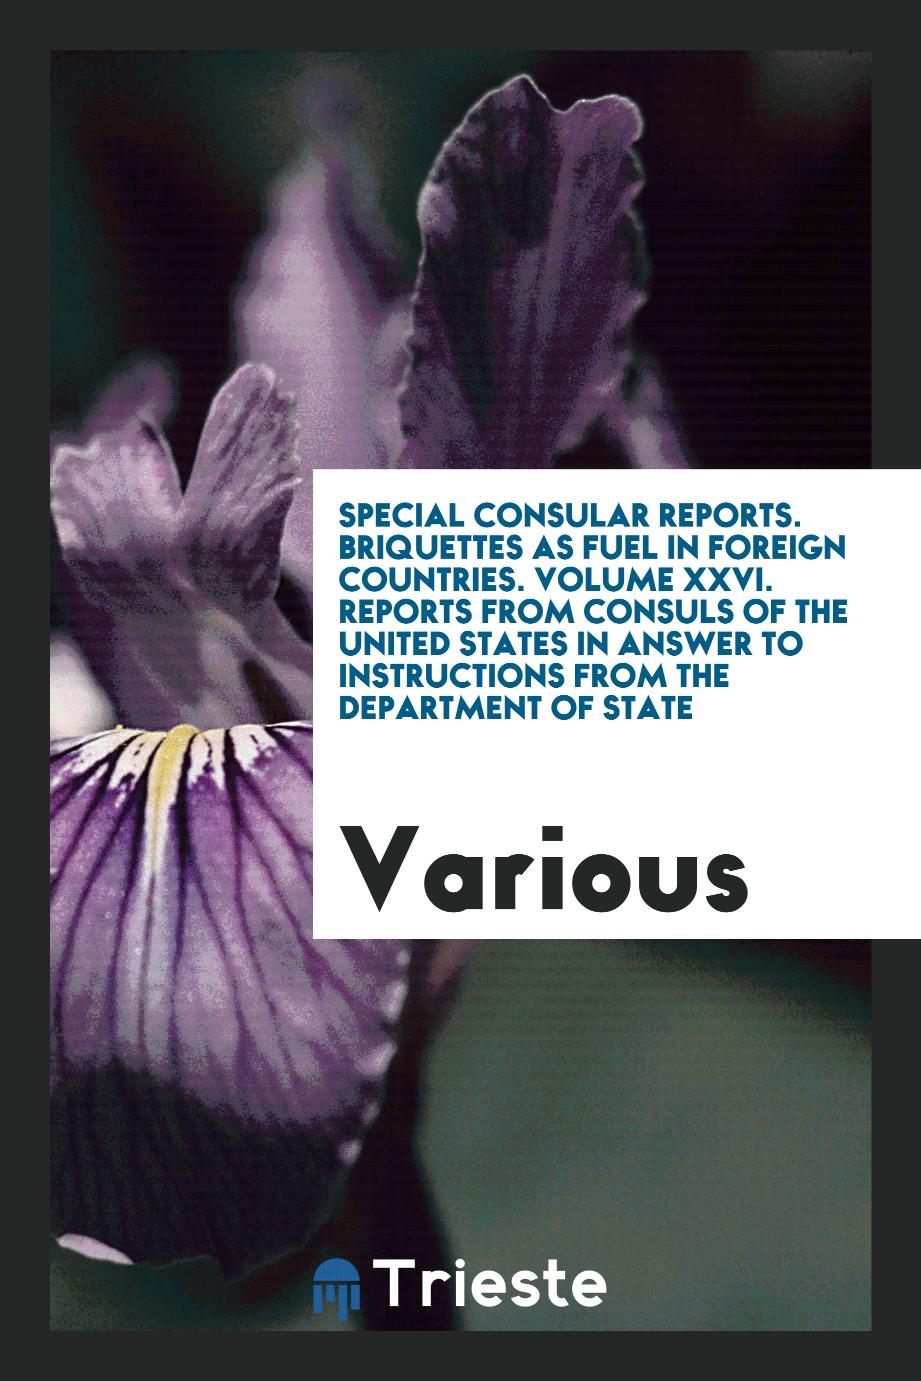 Special Consular Reports. Briquettes as Fuel in Foreign Countries. Volume XXVI. Reports from Consuls of the United States in Answer to Instructions from the Department of State